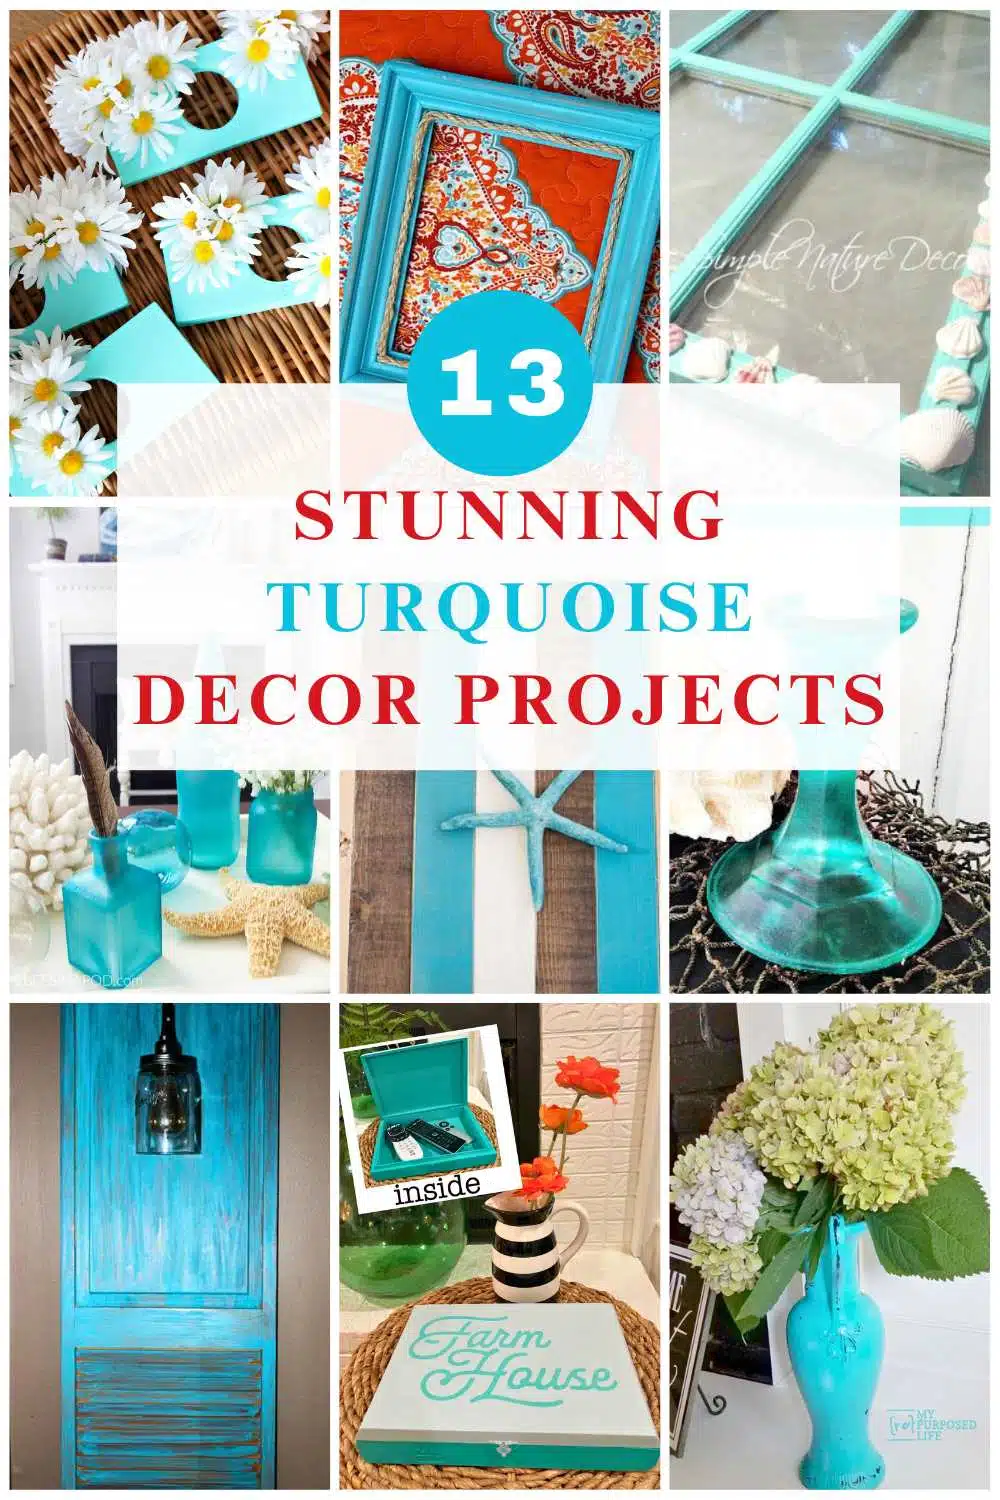 collage with 9 diy turquoise decor projects with text 